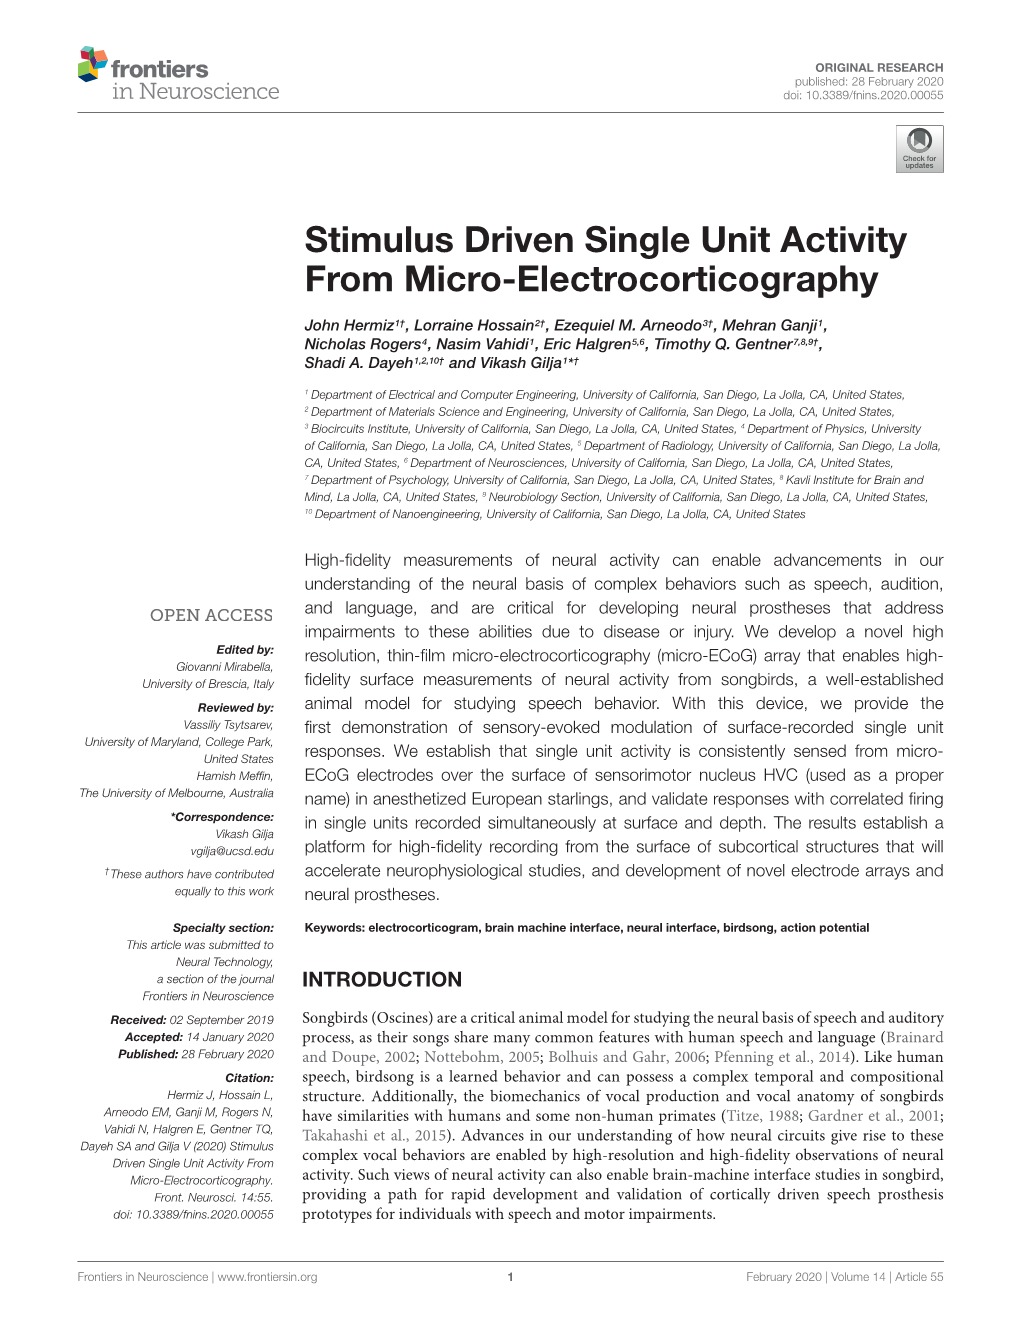 Stimulus Driven Single Unit Activity from Micro-Electrocorticography